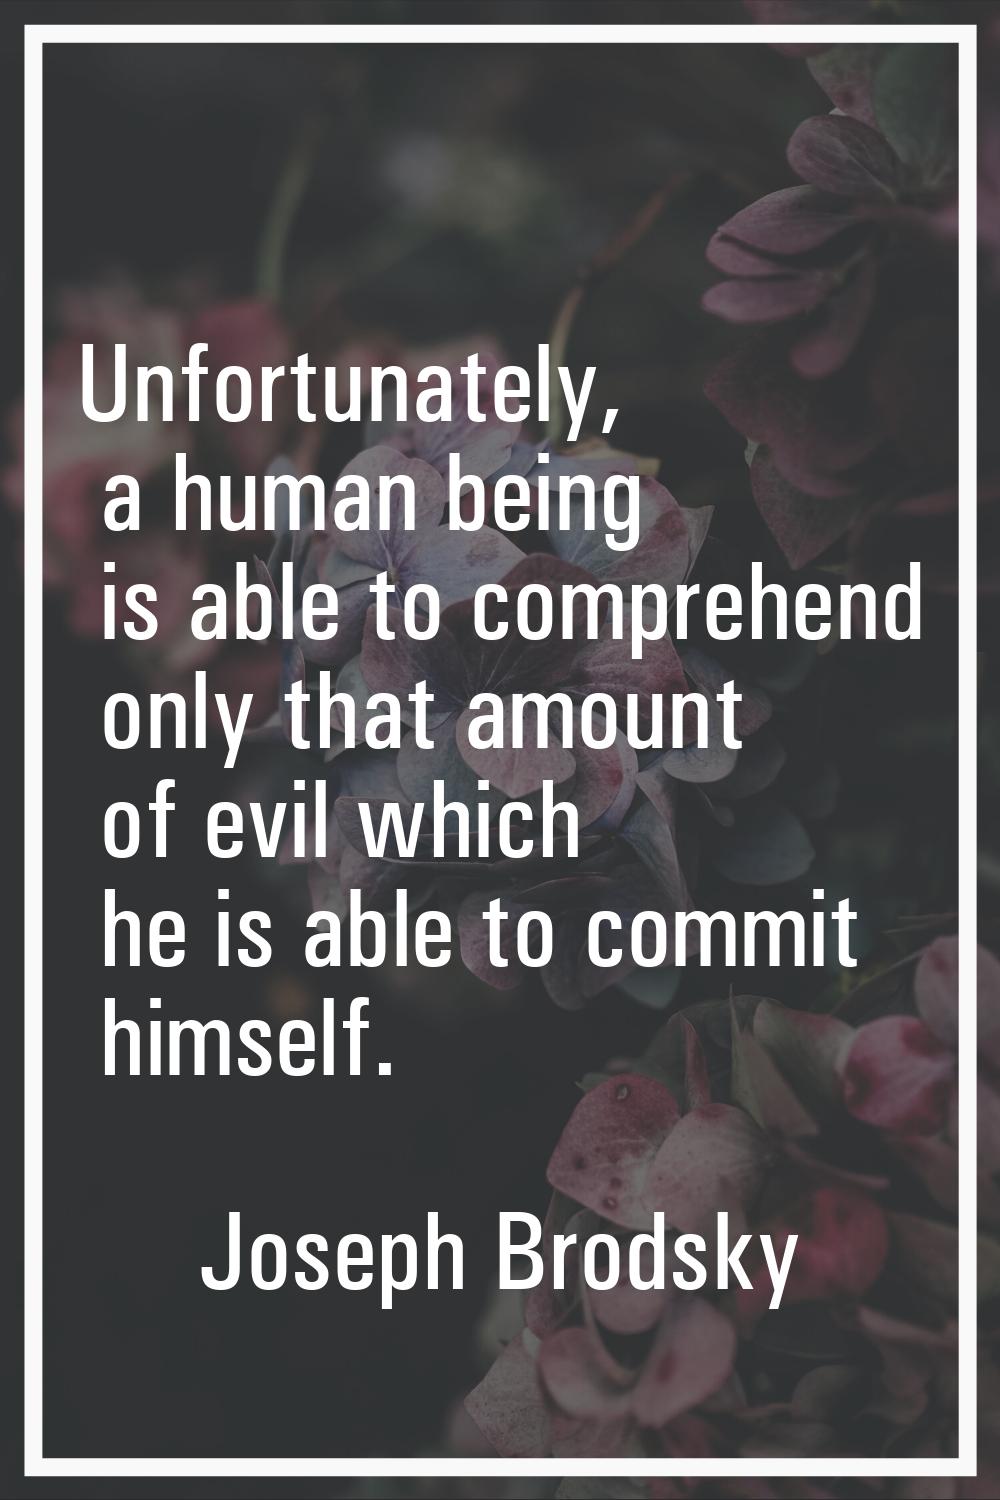 Unfortunately, a human being is able to comprehend only that amount of evil which he is able to com